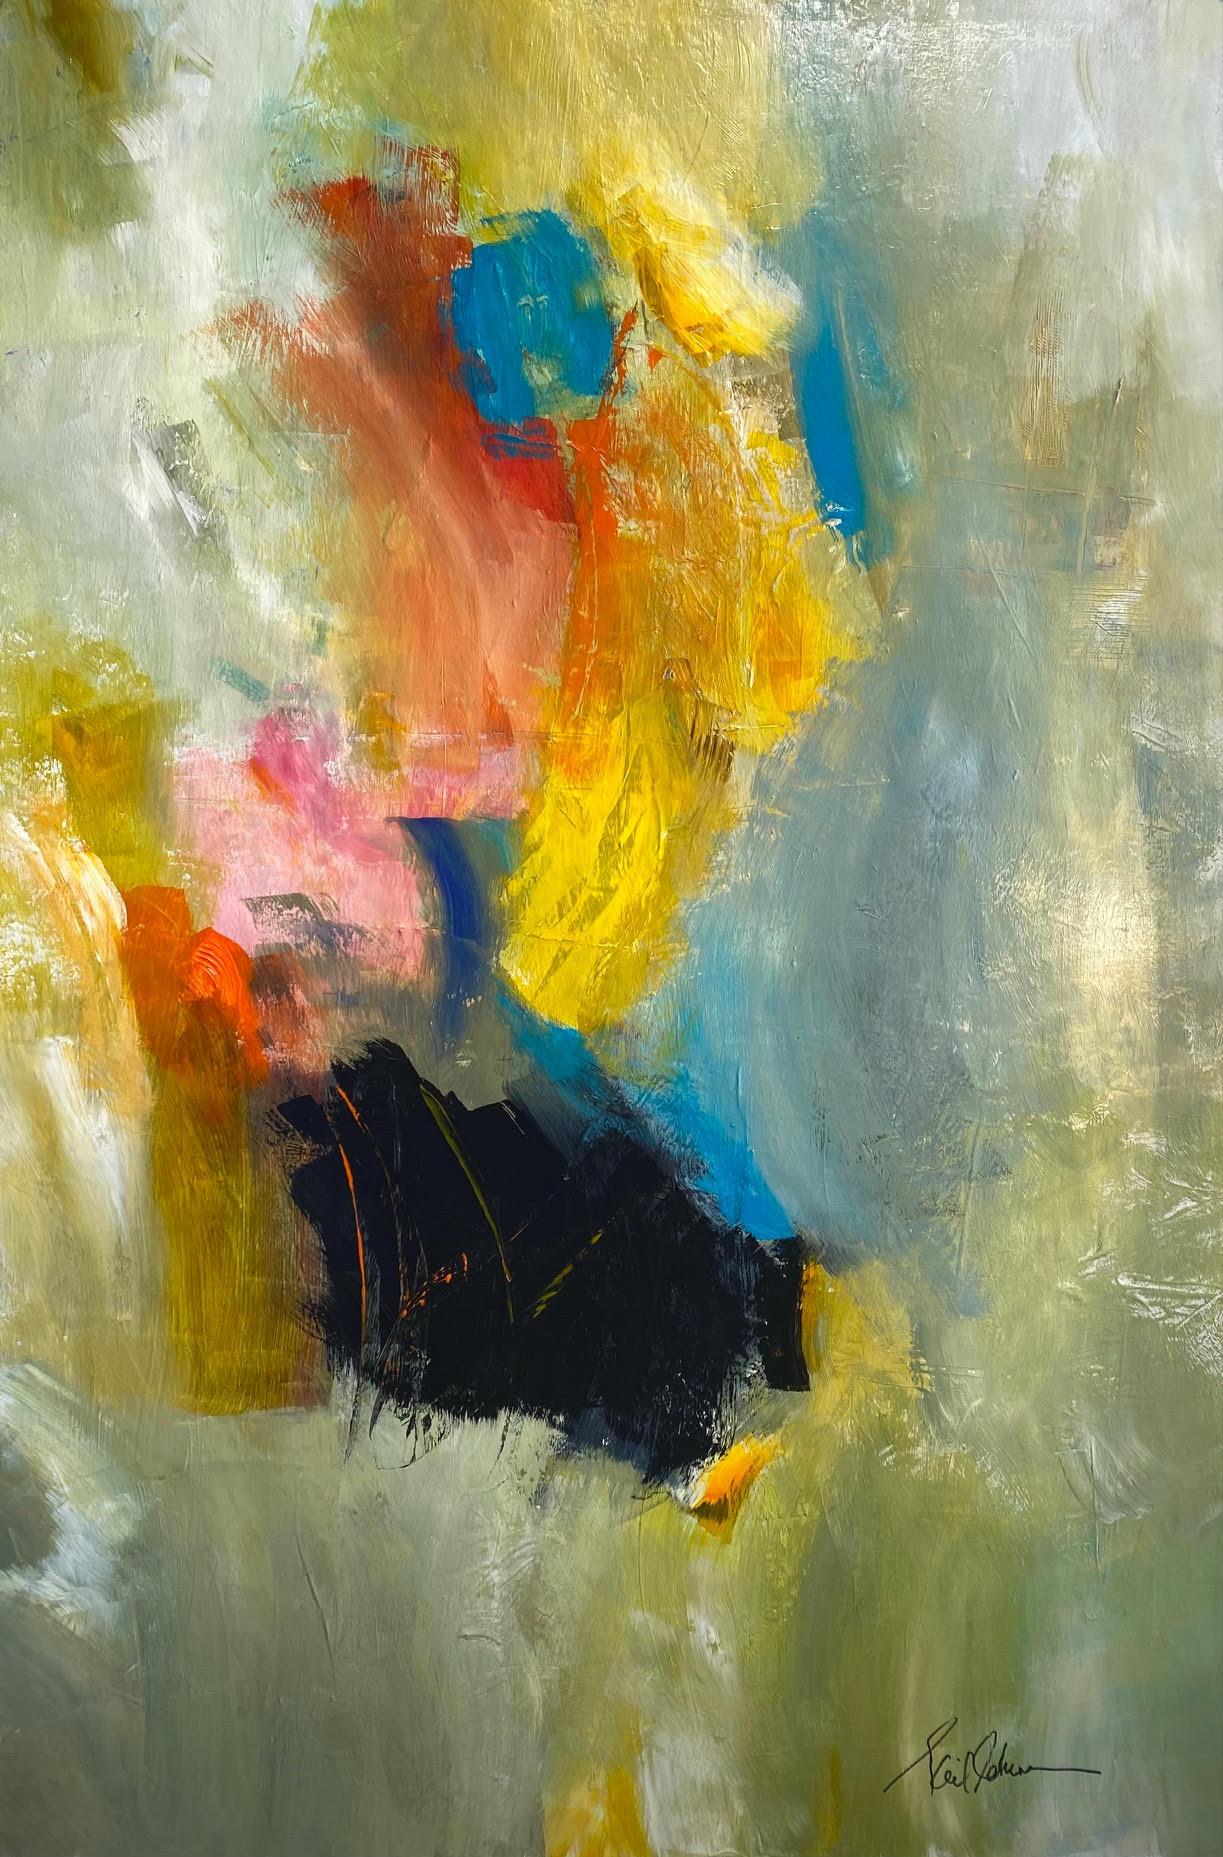 Gail Lehman Abstract Painting - ‘Untitled’Colorful Abstract Contemporary Painting Mixed Media By Gail